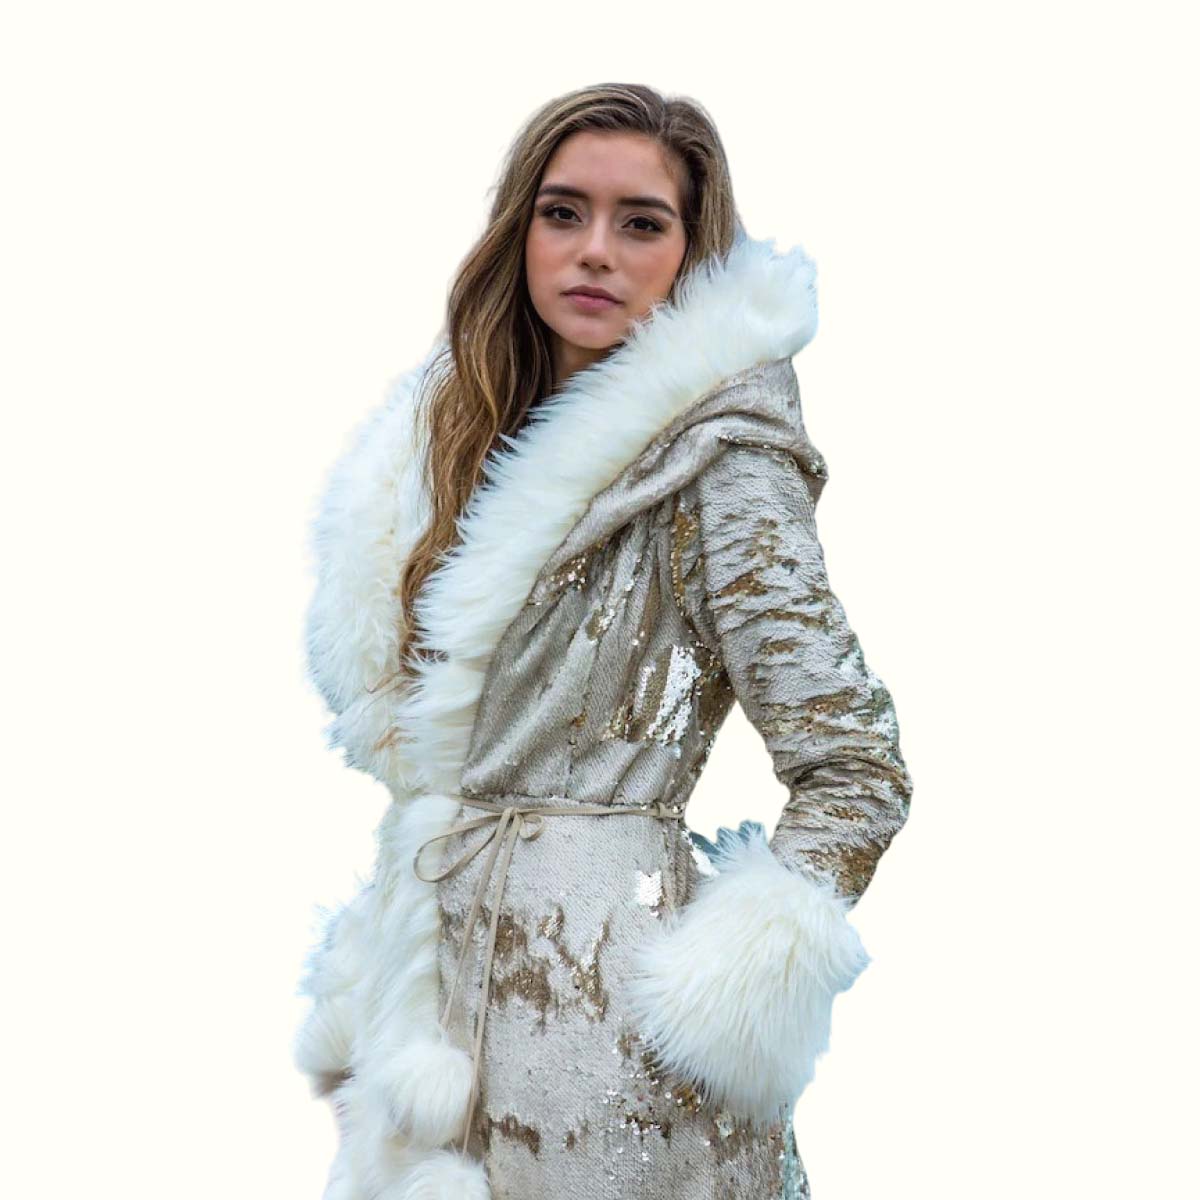 Sequin Hooded Fur Coat Staring At-min